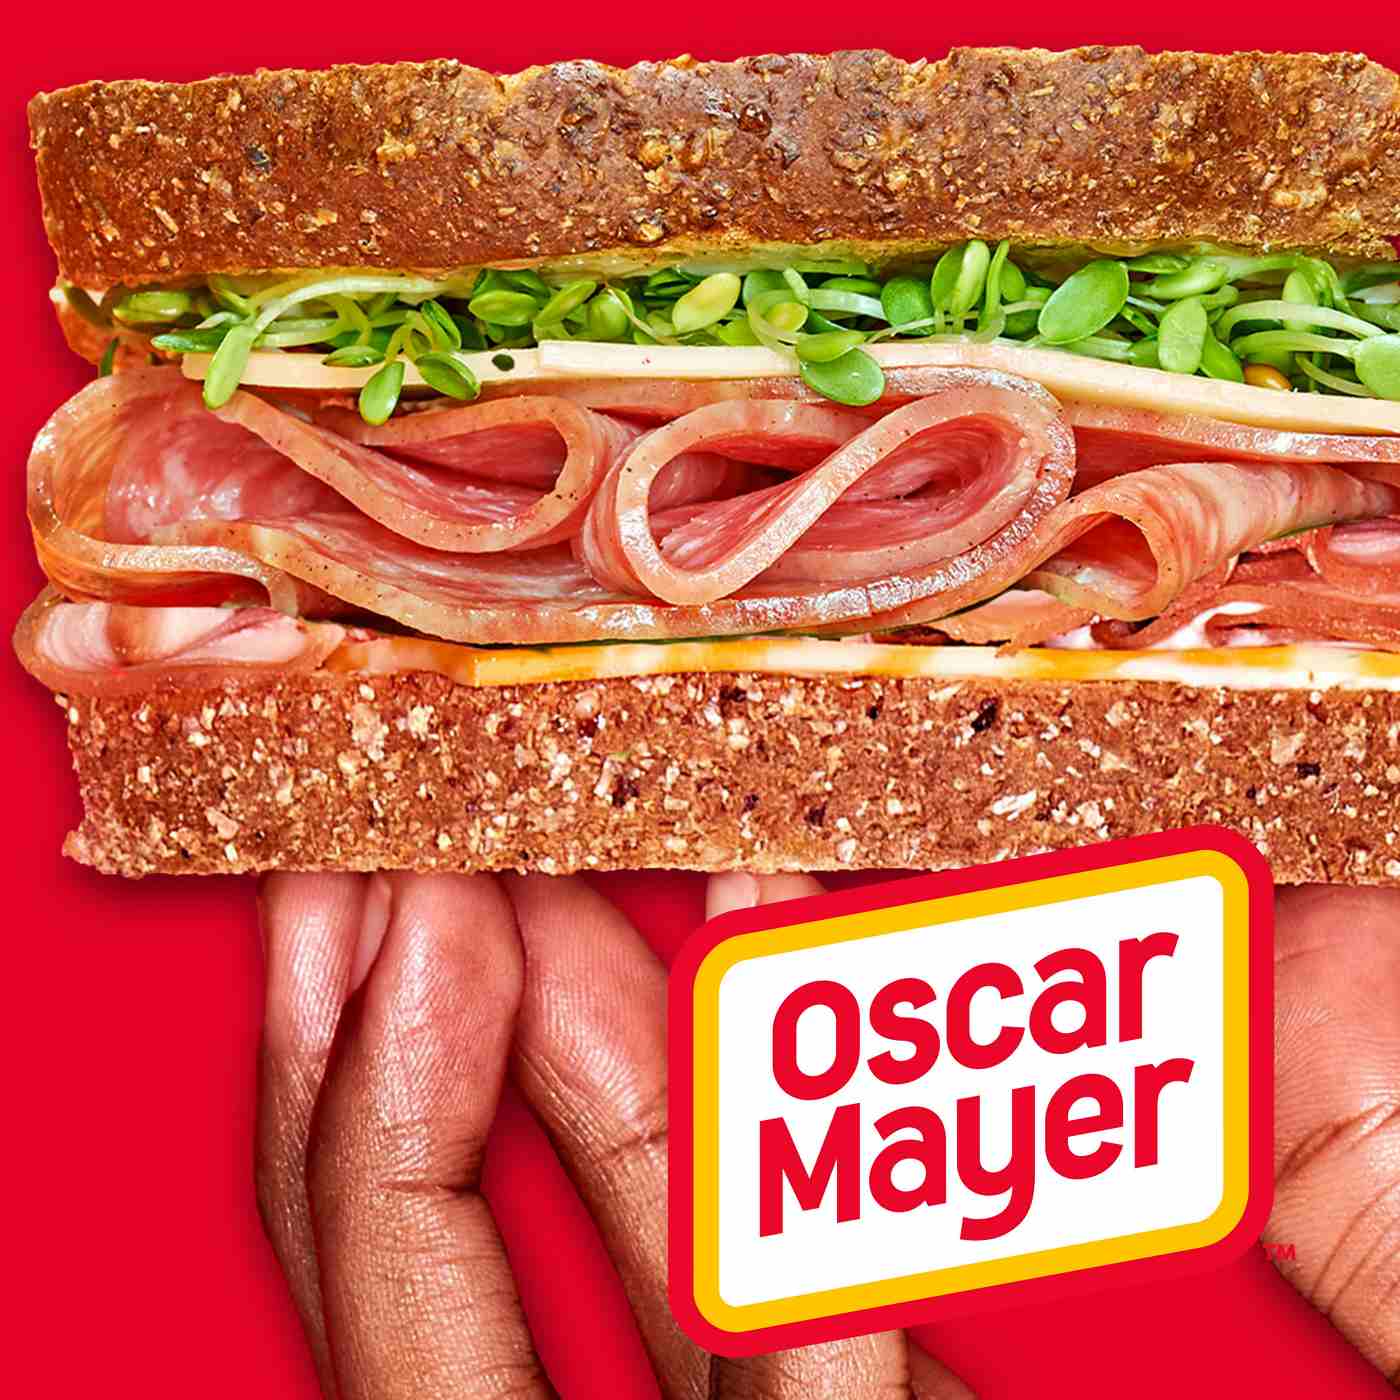 Oscar Mayer Turkey Cotto Salami Sliced Lunch Meat; image 4 of 4